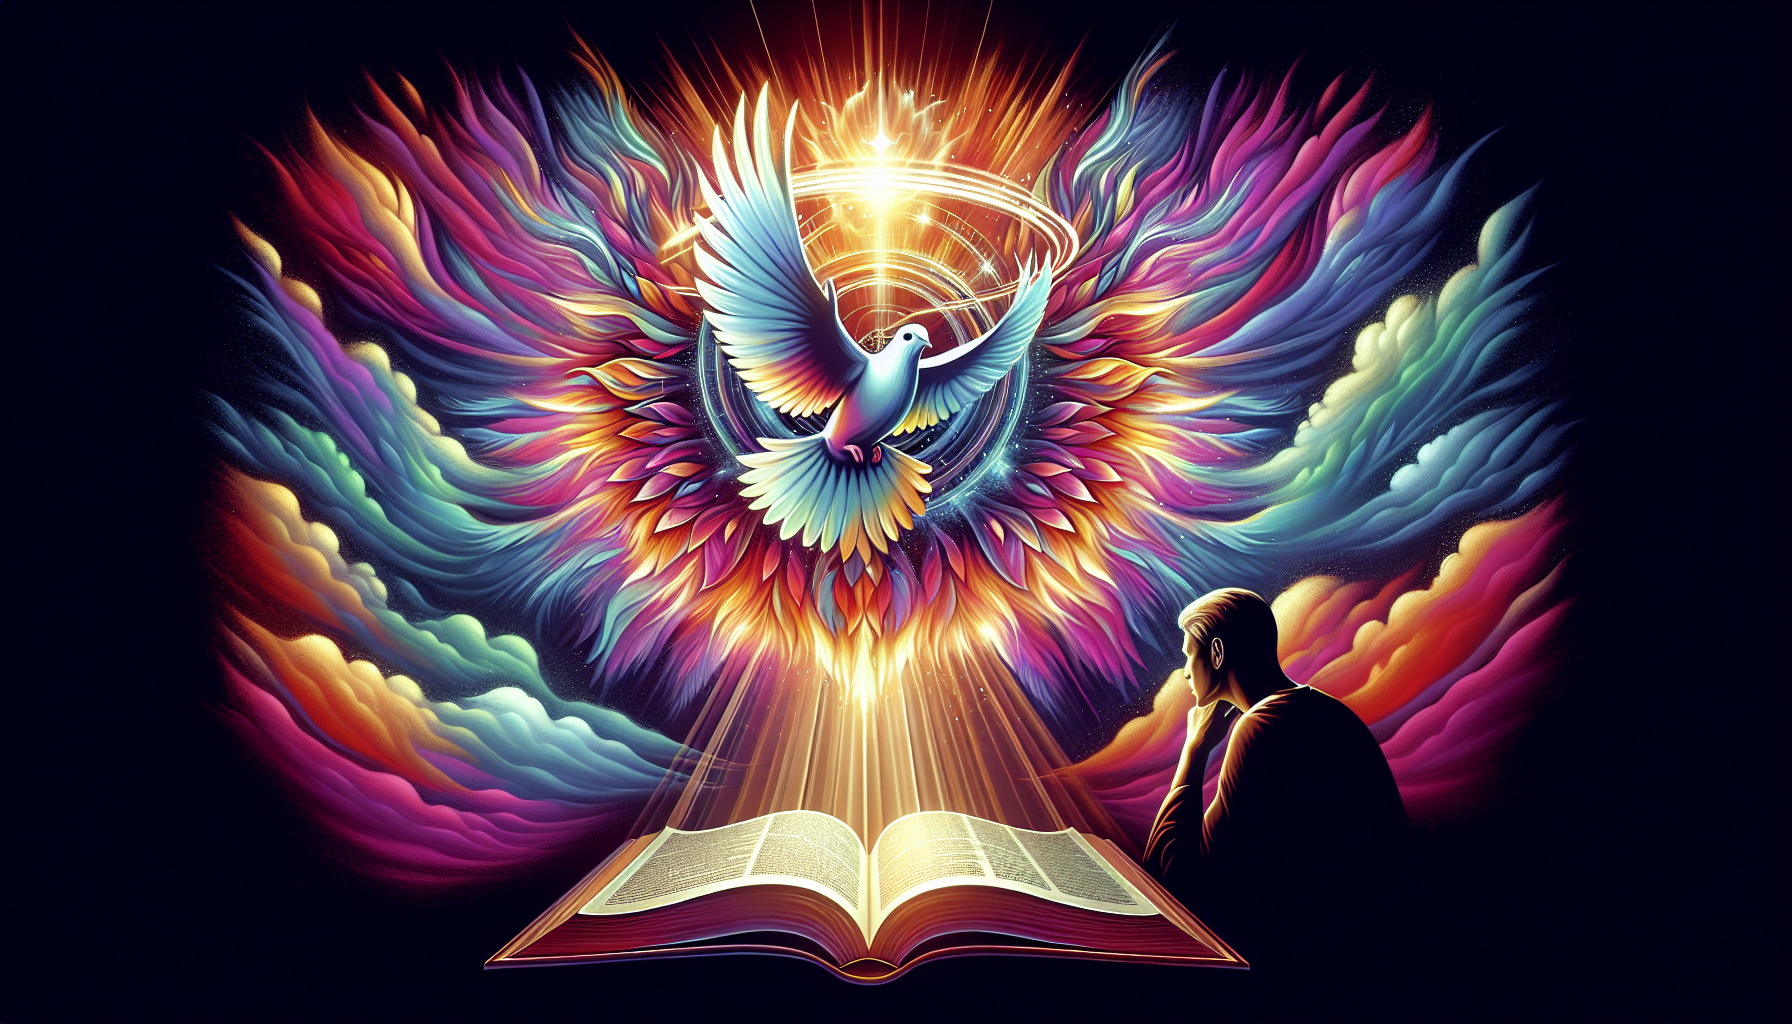 Create an inspirational image depicting a radiant dove surrounded by an ethereal, colorful light, symbolizing the Holy Spirit. The dove should be placed above an open Bible, with its wings gently outs